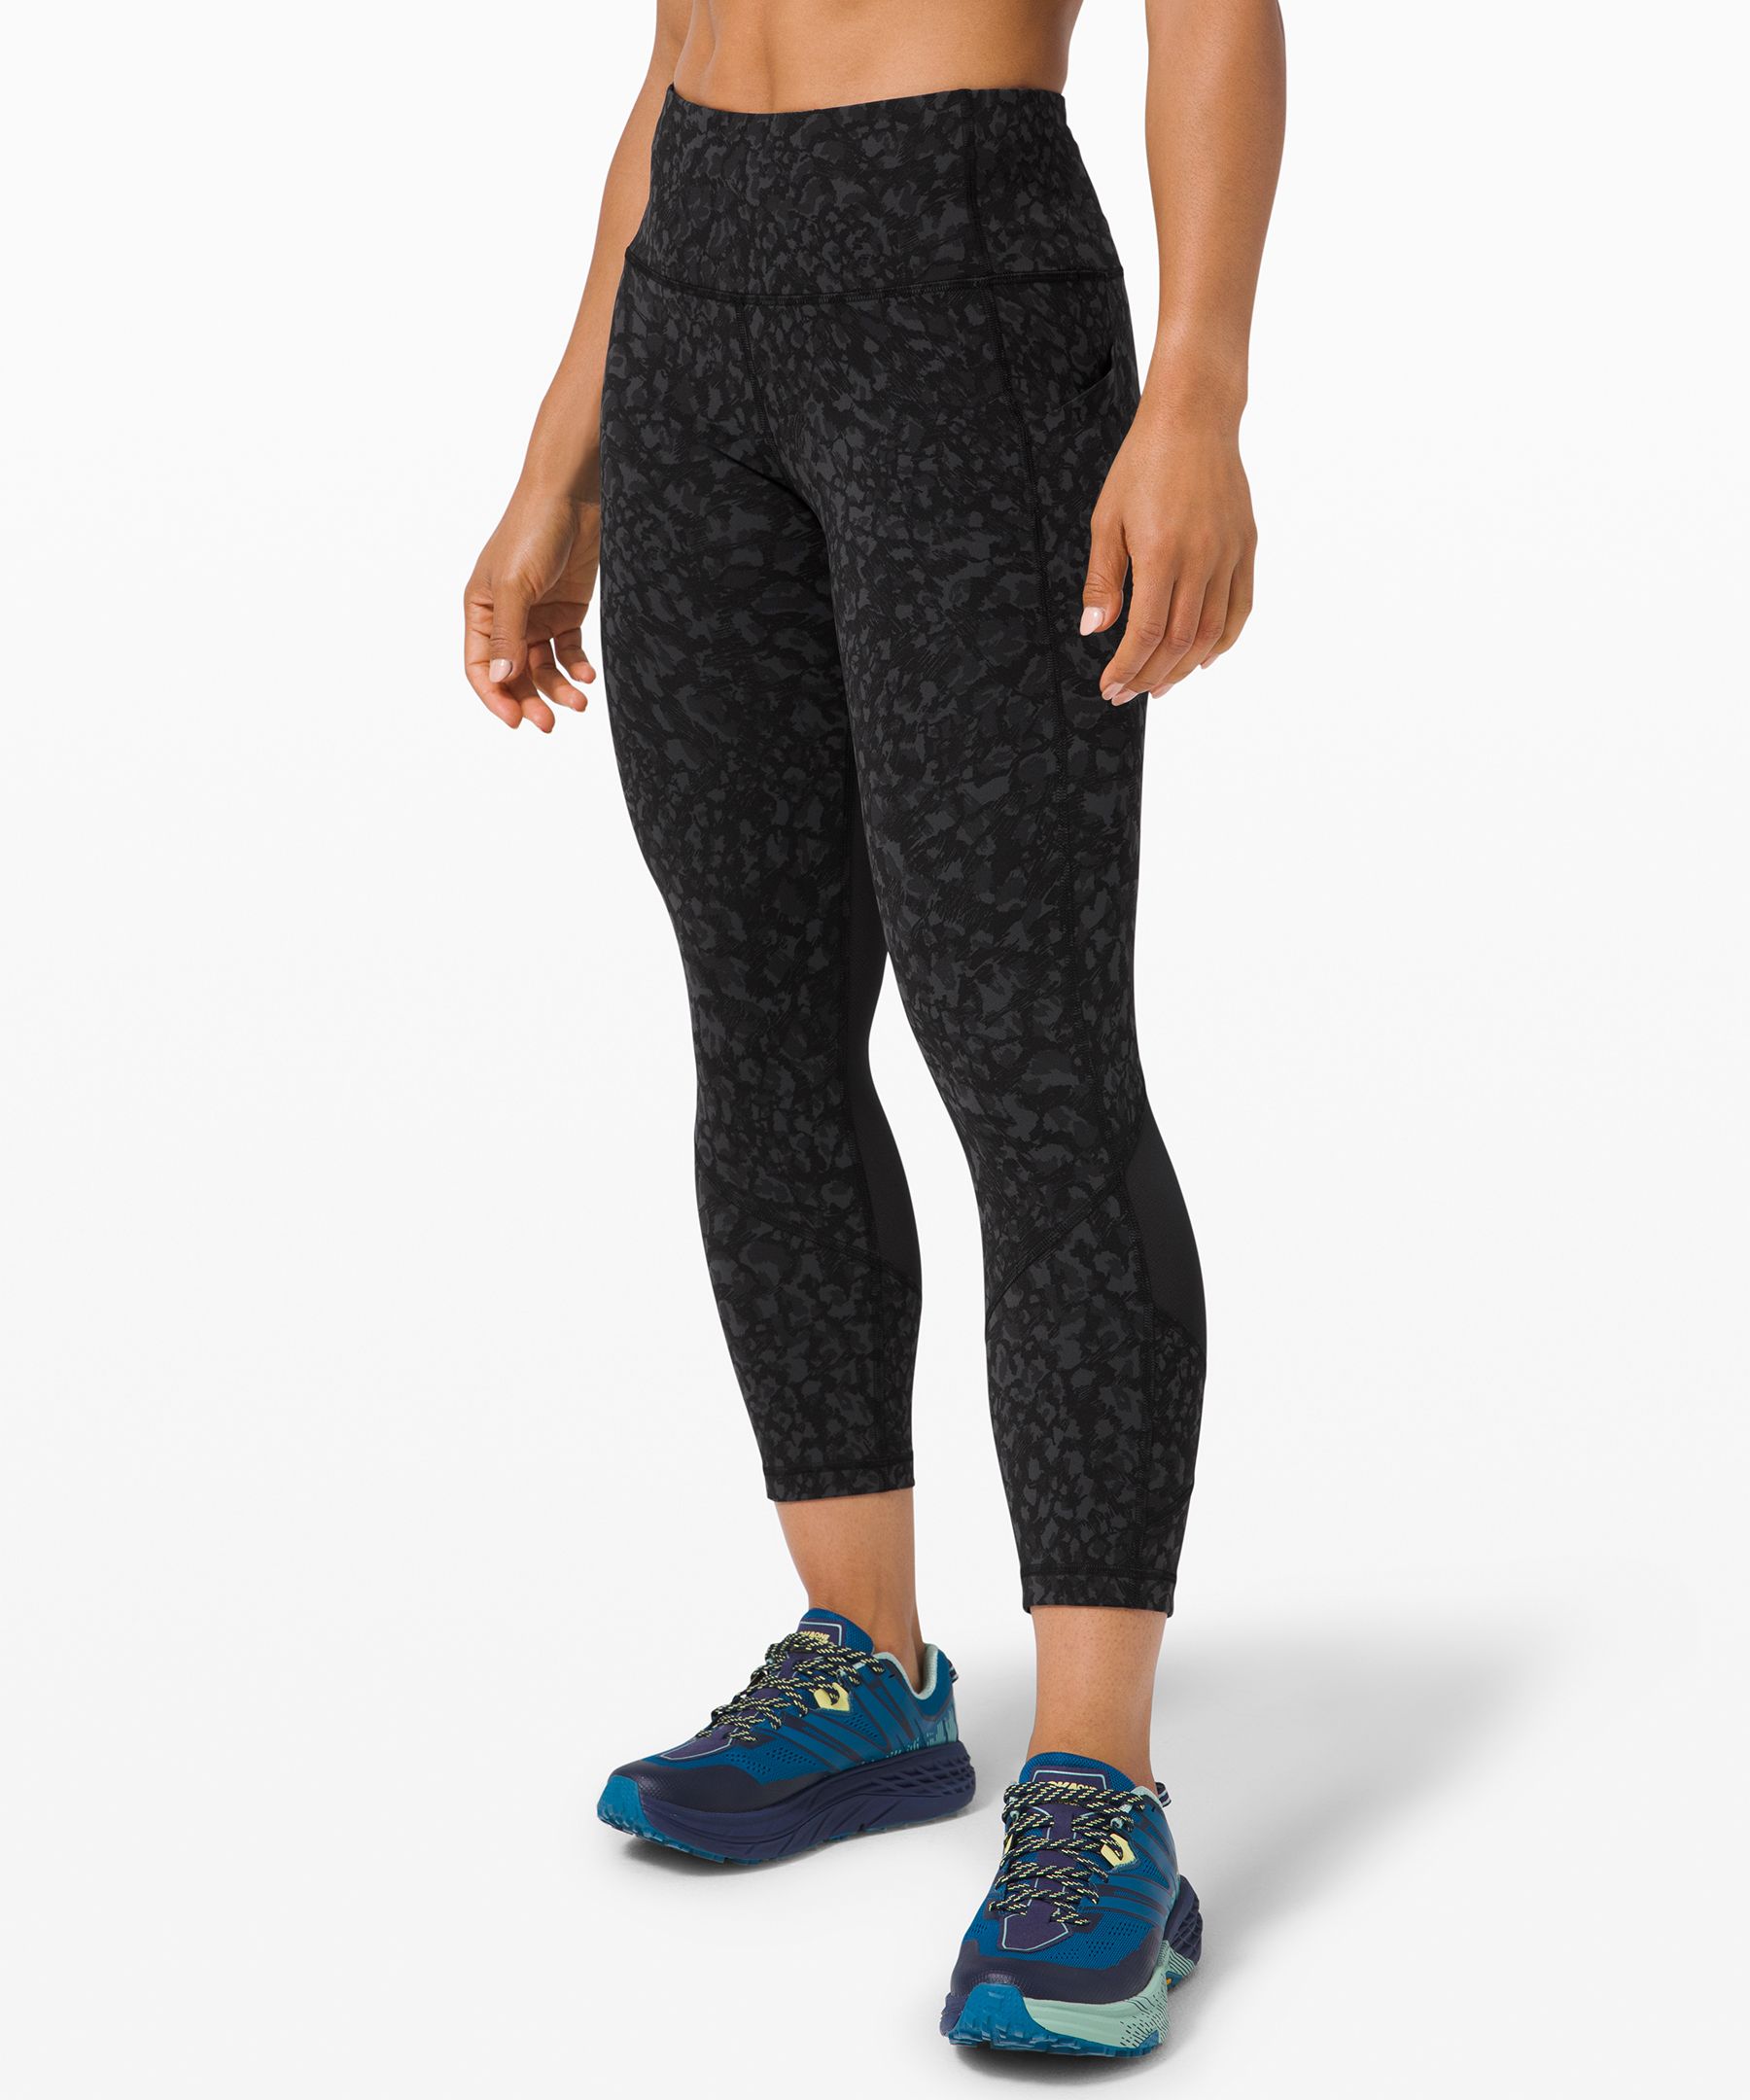 Lululemon Pace Rival Crop *22 - Nocturnal Teal (First Release